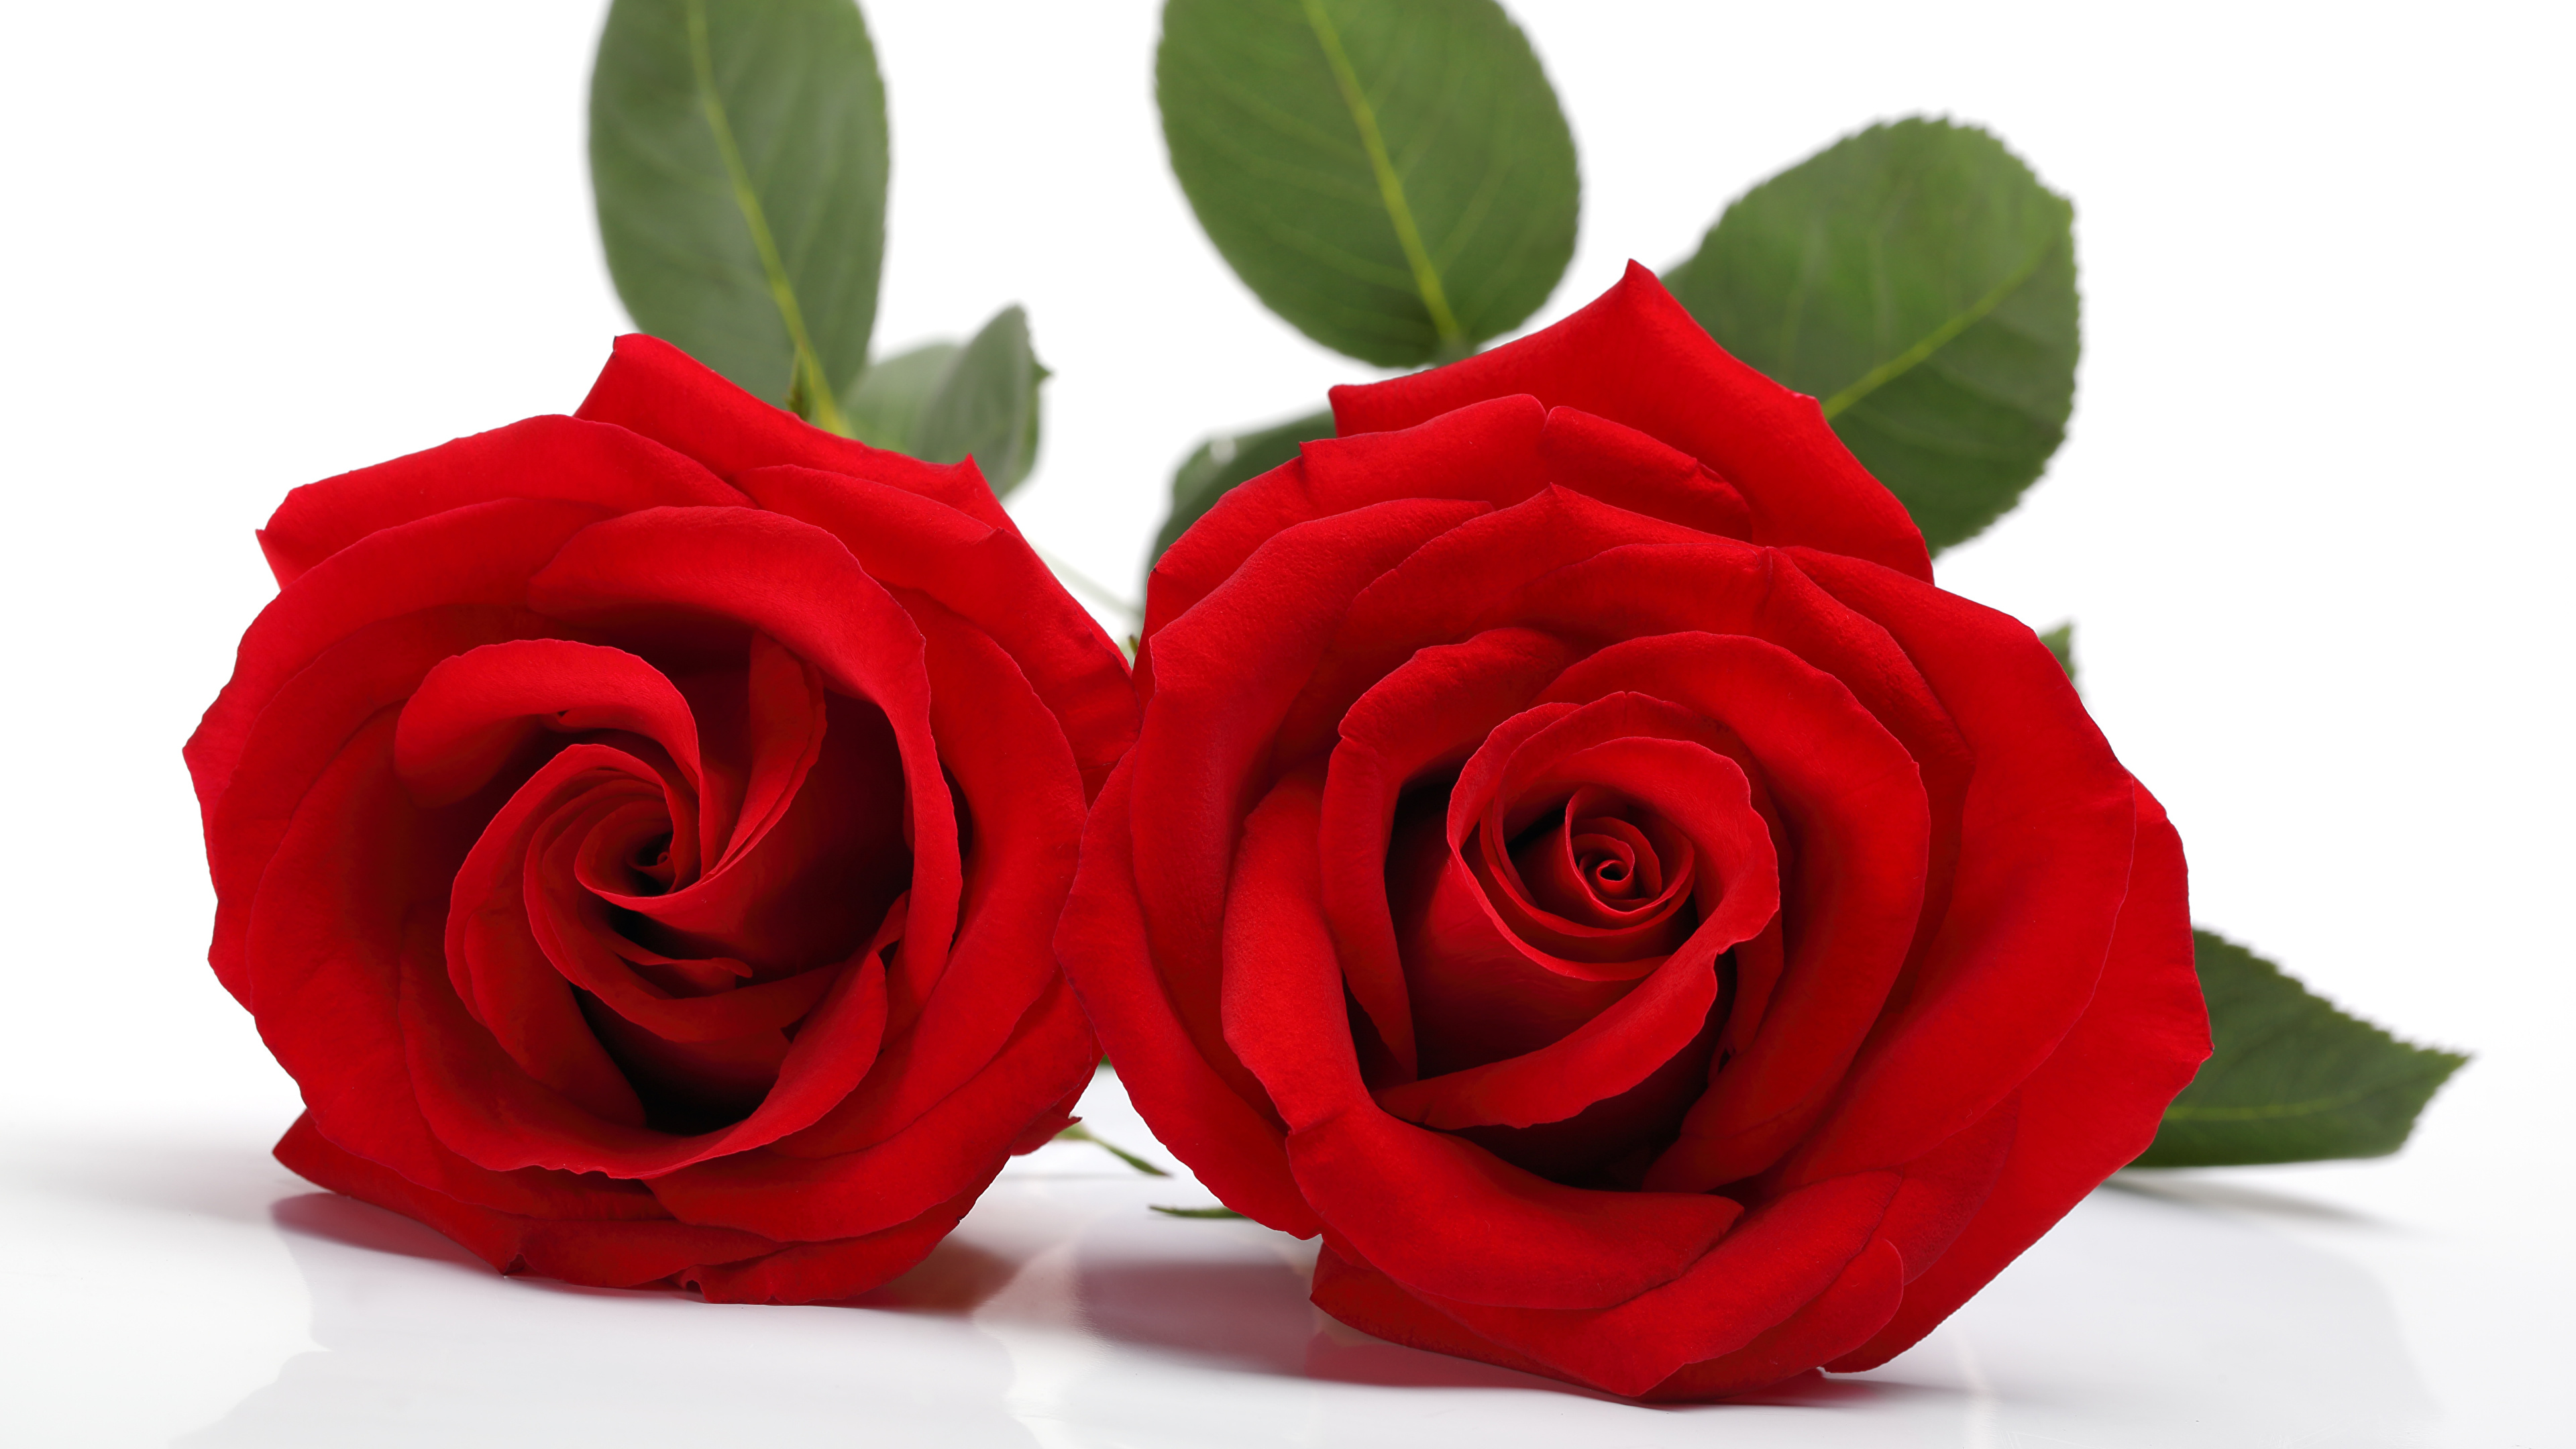 Wallpaper Two Red Roses Flowers White background 3840x2160